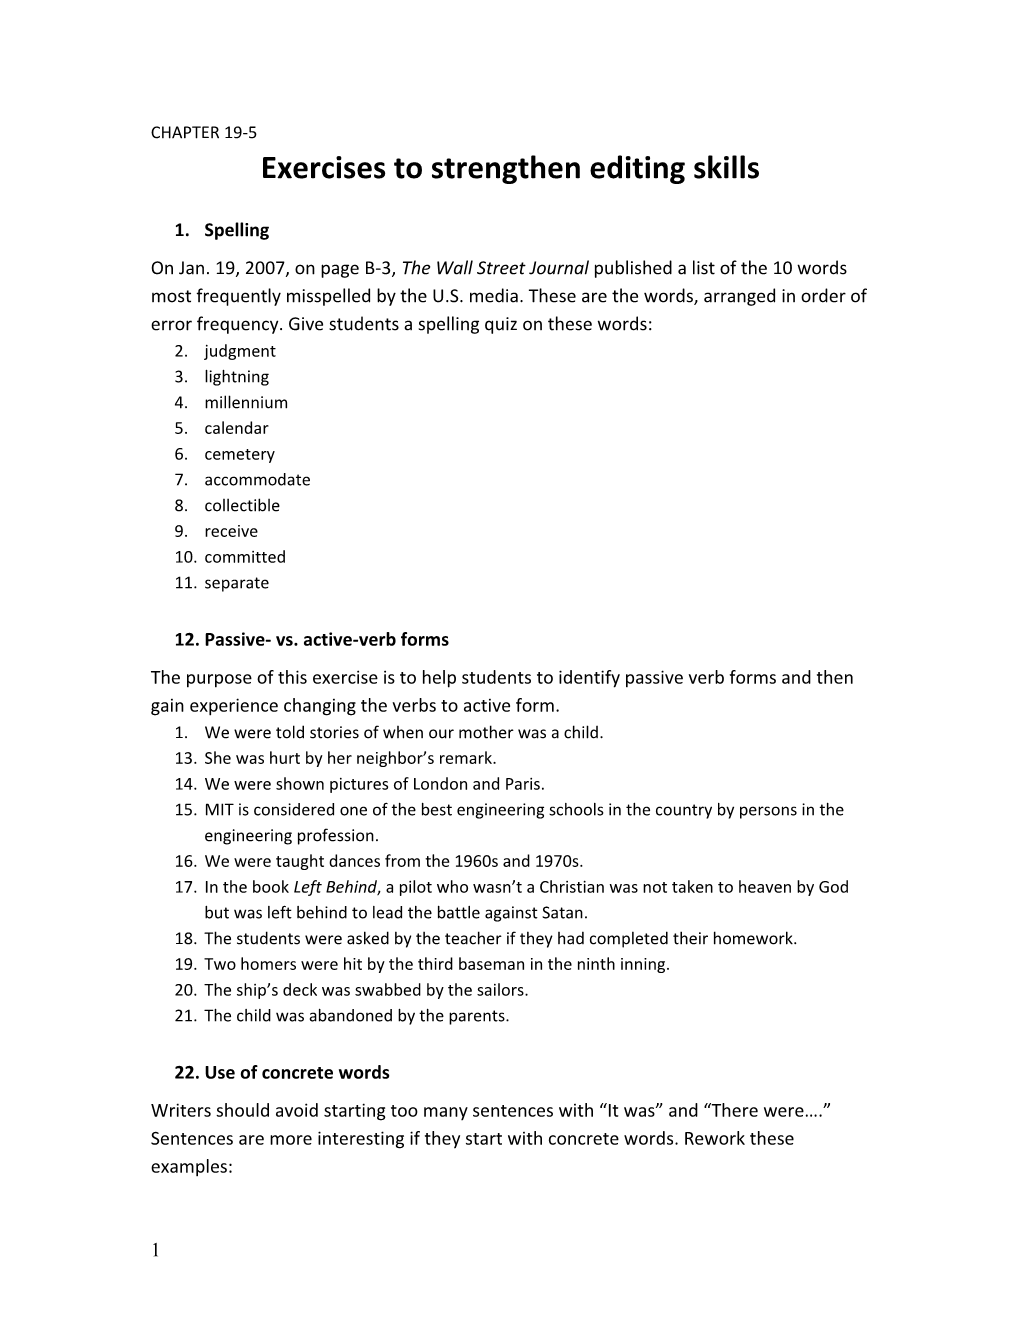 Extra Credit Exercises to Strengthen Editing Skills